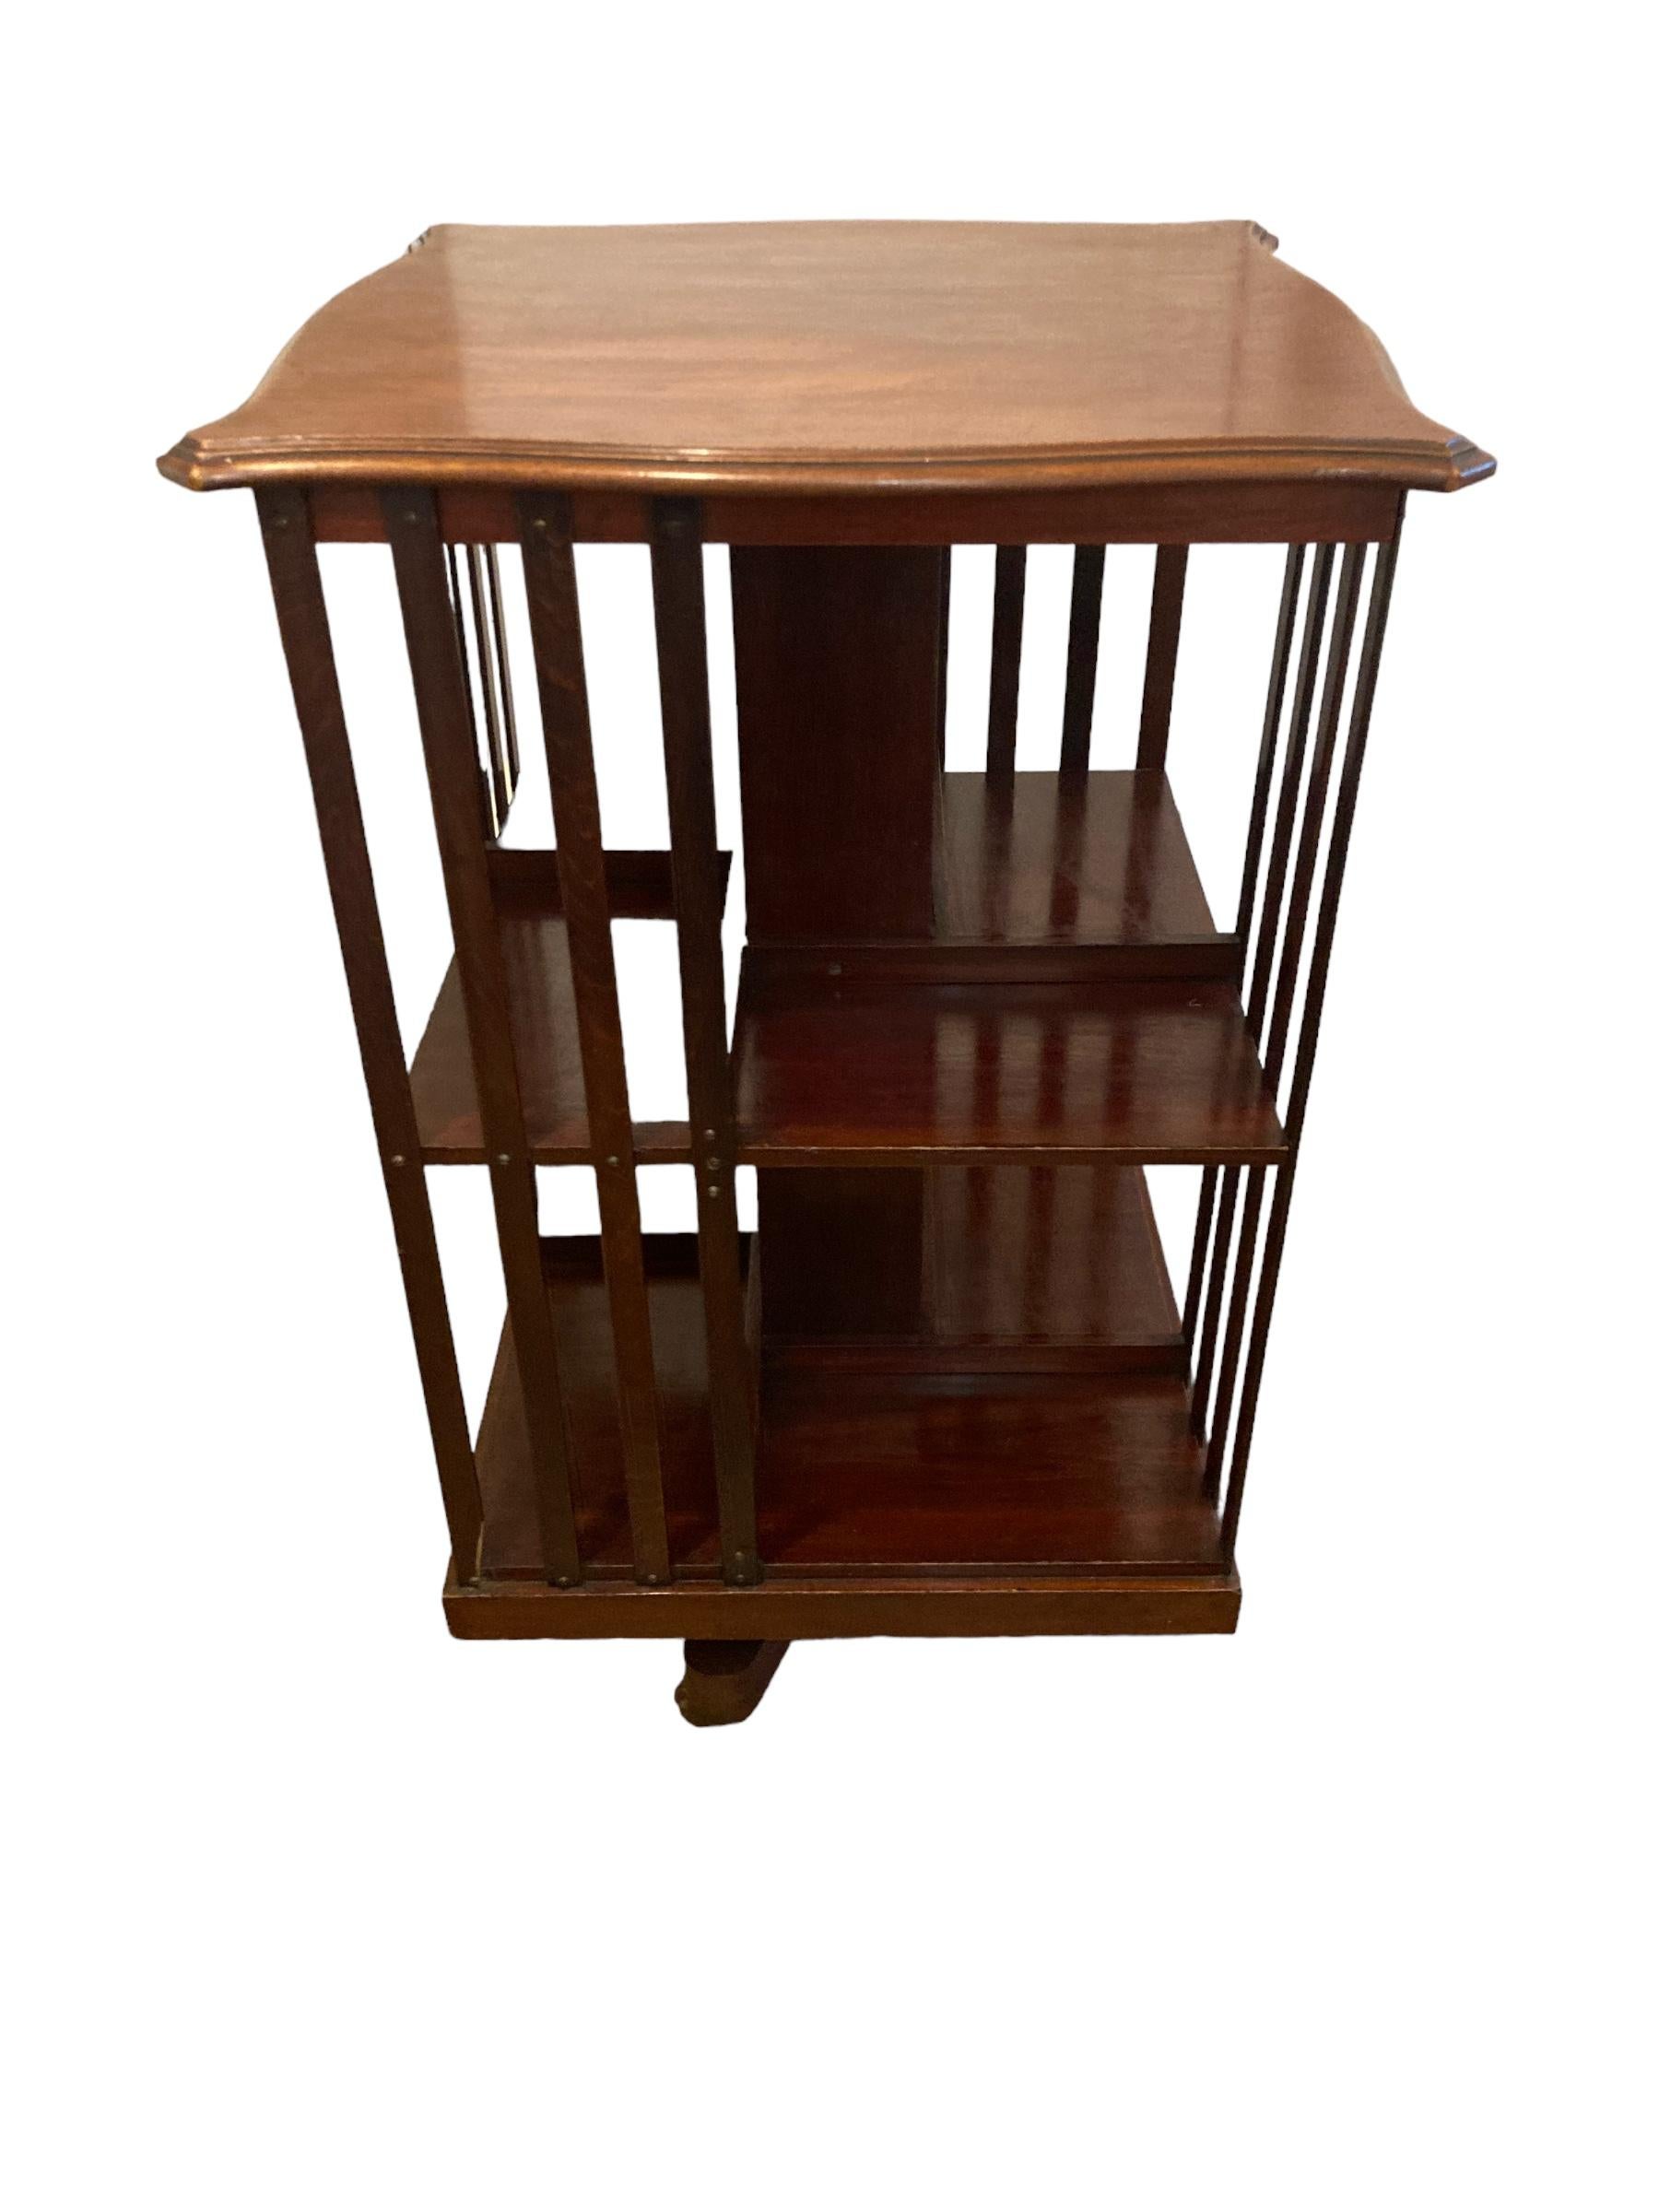 British Edwardian Mahogany revolving Bookcase on casters and slatted supports.